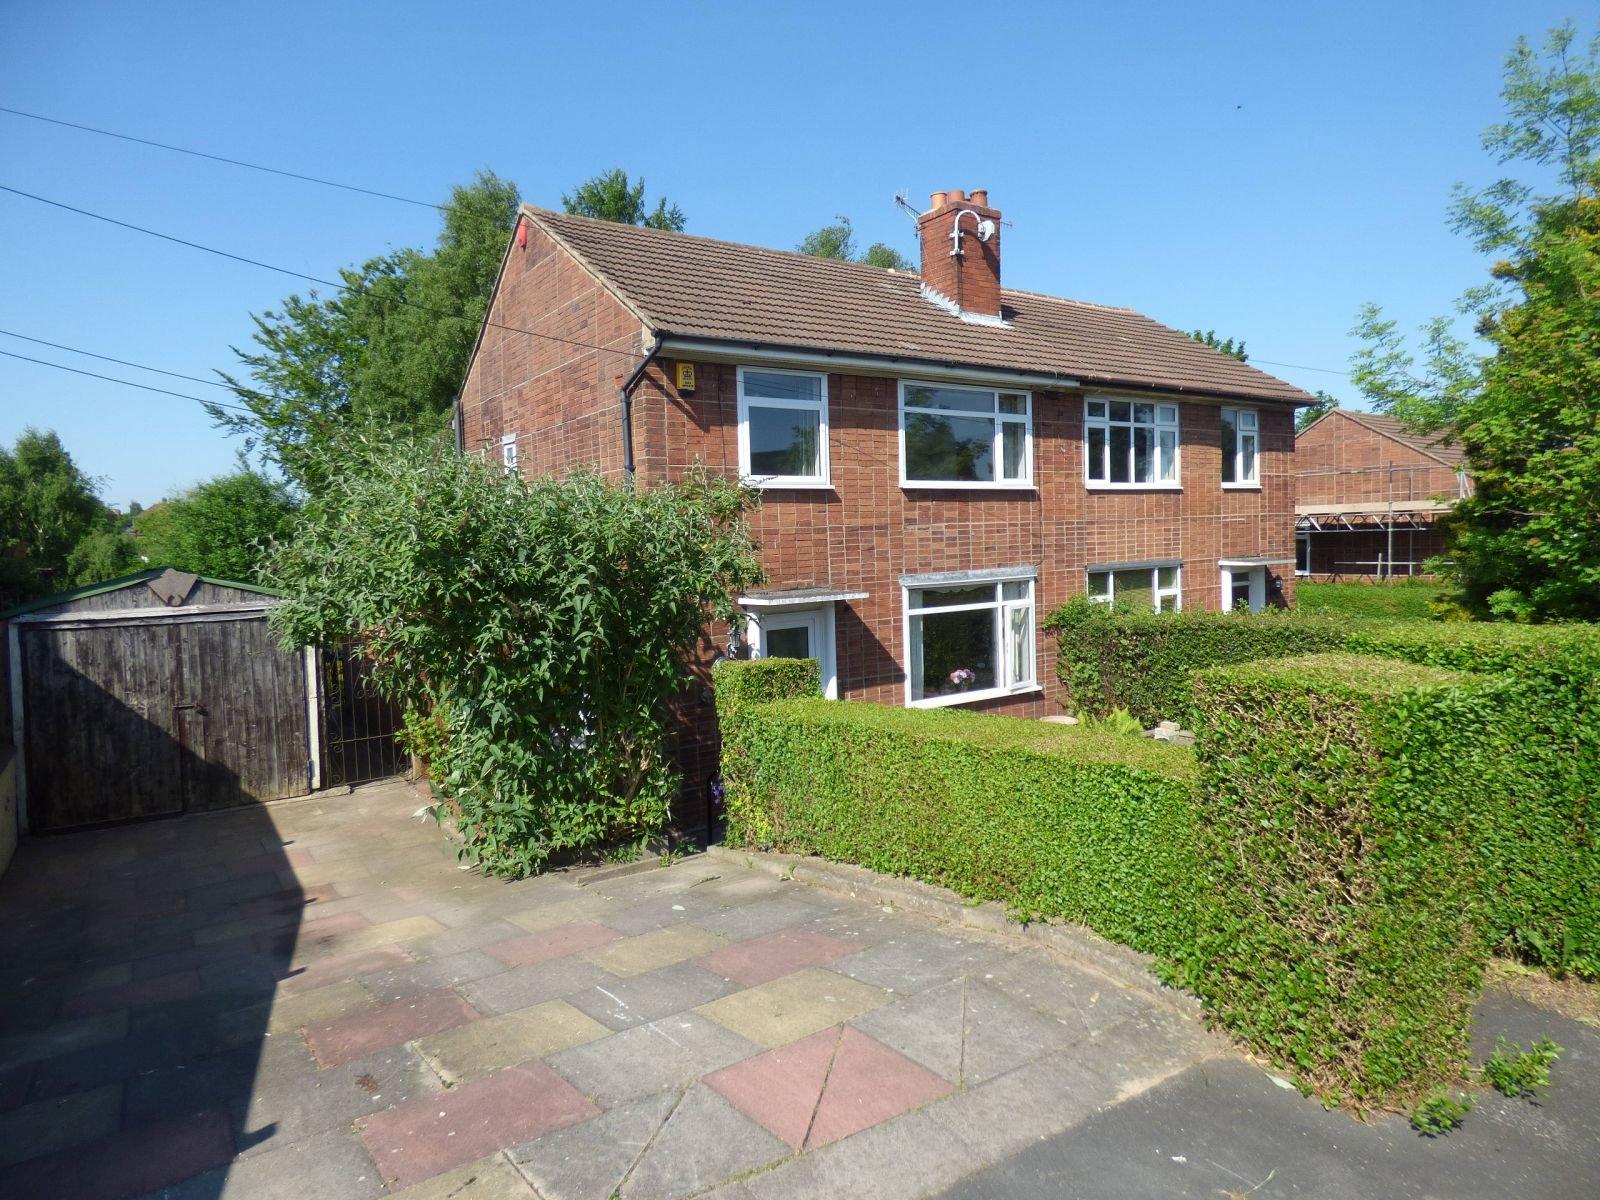 Hereford Avenue, Newcastle-under-Lyme, Staffordshire, ST5 3ED